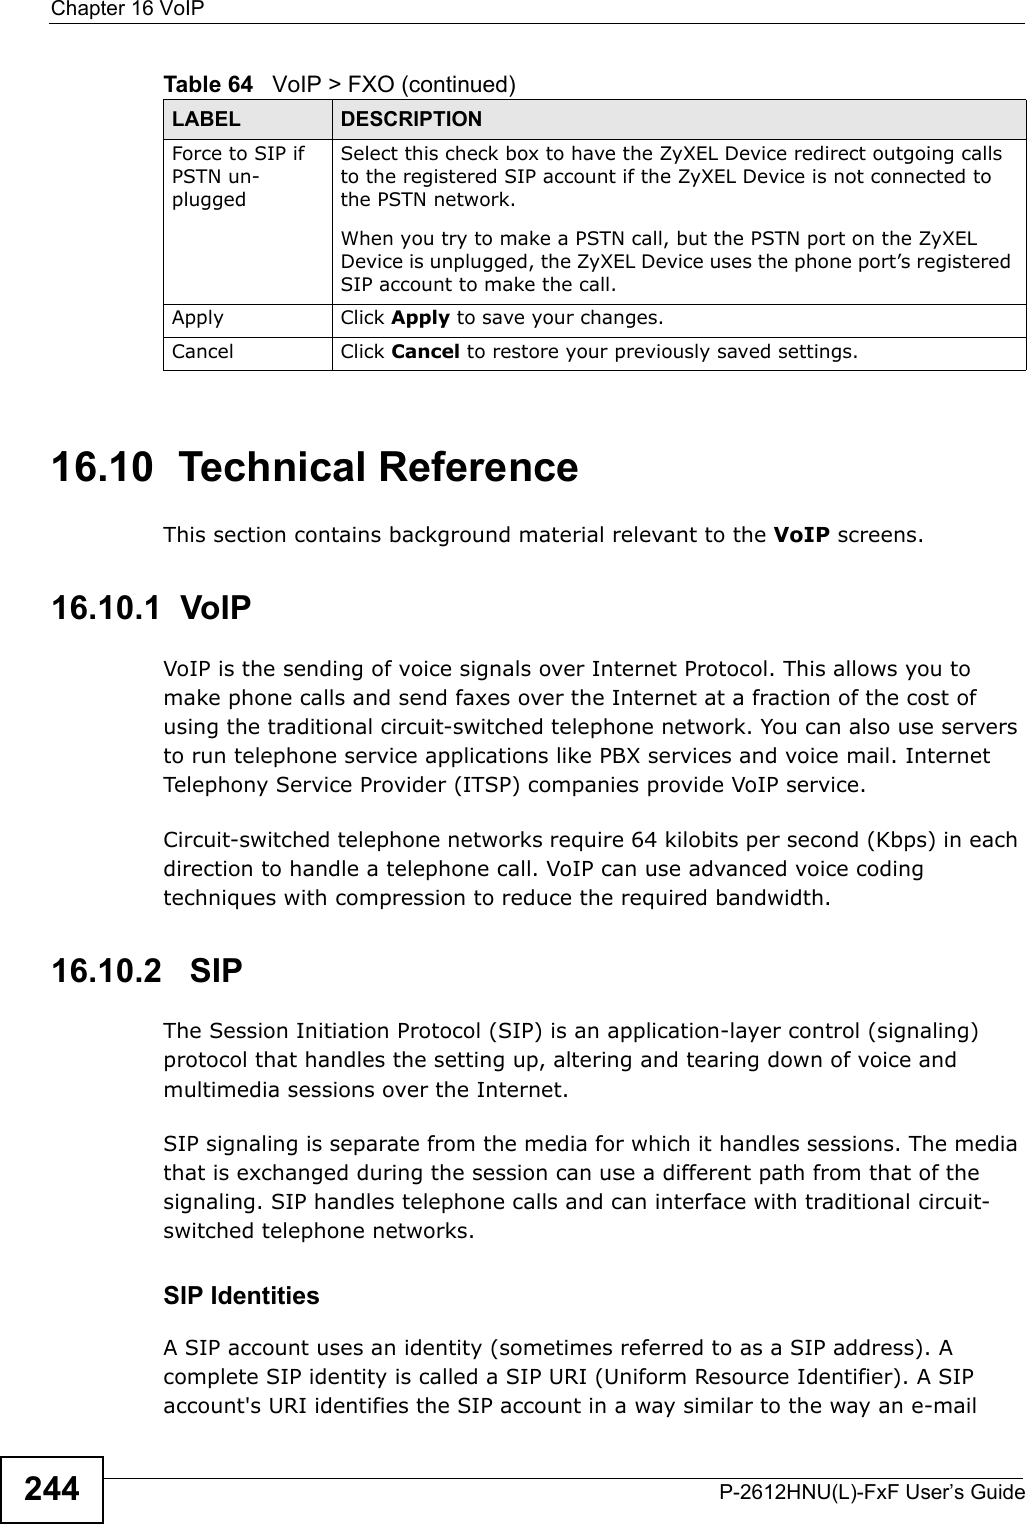 Chapter 16 VoIPP-2612HNU(L)-FxF User’s Guide24416.10  Technical ReferenceThis section contains background material relevant to the VoIP screens.16.10.1  VoIP VoIP is the sending of voice signals over Internet Protocol. This allows you to make phone calls and send faxes over the Internet at a fraction of the cost of using the traditional circuit-switched telephone network. You can also use servers to run telephone service applications like PBX services and voice mail. Internet Telephony Service Provider (ITSP) companies provide VoIP service. Circuit-switched telephone networks require 64 kilobits per second (Kbps) in each direction to handle a telephone call. VoIP can use advanced voice coding techniques with compression to reduce the required bandwidth. 16.10.2   SIPThe Session Initiation Protocol (SIP) is an application-layer control (signaling) protocol that handles the setting up, altering and tearing down of voice and multimedia sessions over the Internet.SIP signaling is separate from the media for which it handles sessions. The media that is exchanged during the session can use a different path from that of the signaling. SIP handles telephone calls and can interface with traditional circuit-switched telephone networks.SIP IdentitiesA SIP account uses an identity (sometimes referred to as a SIP address). Acomplete SIP identity is called a SIP URI (Uniform Resource Identifier). A SIP account&apos;s URI identifies the SIP account in a way similar to the way an e-mailForce to SIP ifPSTN un-pluggedSelect this check box to have the ZyXEL Device redirect outgoing calls to the registered SIP account if the ZyXEL Device is not connected to the PSTN network.When you try to make a PSTN call, but the PSTN port on the ZyXEL Device is unplugged, the ZyXEL Device uses the phone port’s registeredSIP account to make the call.Apply Click Apply to save your changes.Cancel Click Cancel to restore your previously saved settings.Table 64   VoIP &gt; FXO (continued)LABEL DESCRIPTION